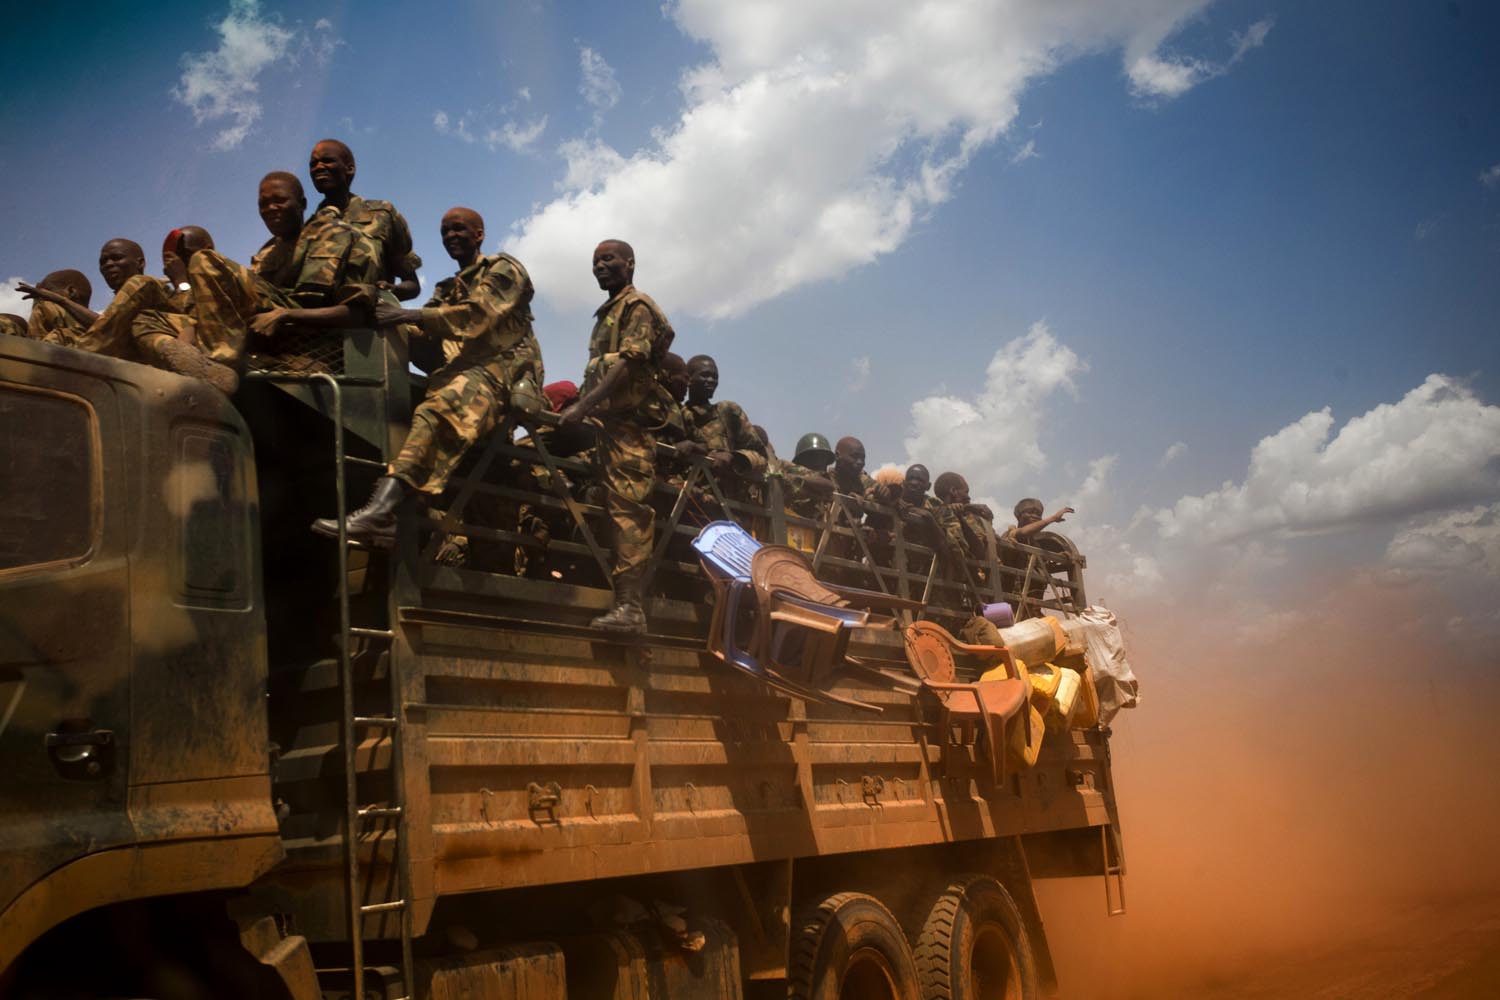 A truck filled with soldiers of the Sudan People's Liberation Army (SPLA), the military force of South Sudan, rushes toward the front line in mid-April. They are headed for the outskirts of Heglig, a disputed town they took briefly from the northern regime of Sudan, which is ruled from Khartoum. South Sudan declared independence from Khartoum in July 2011.